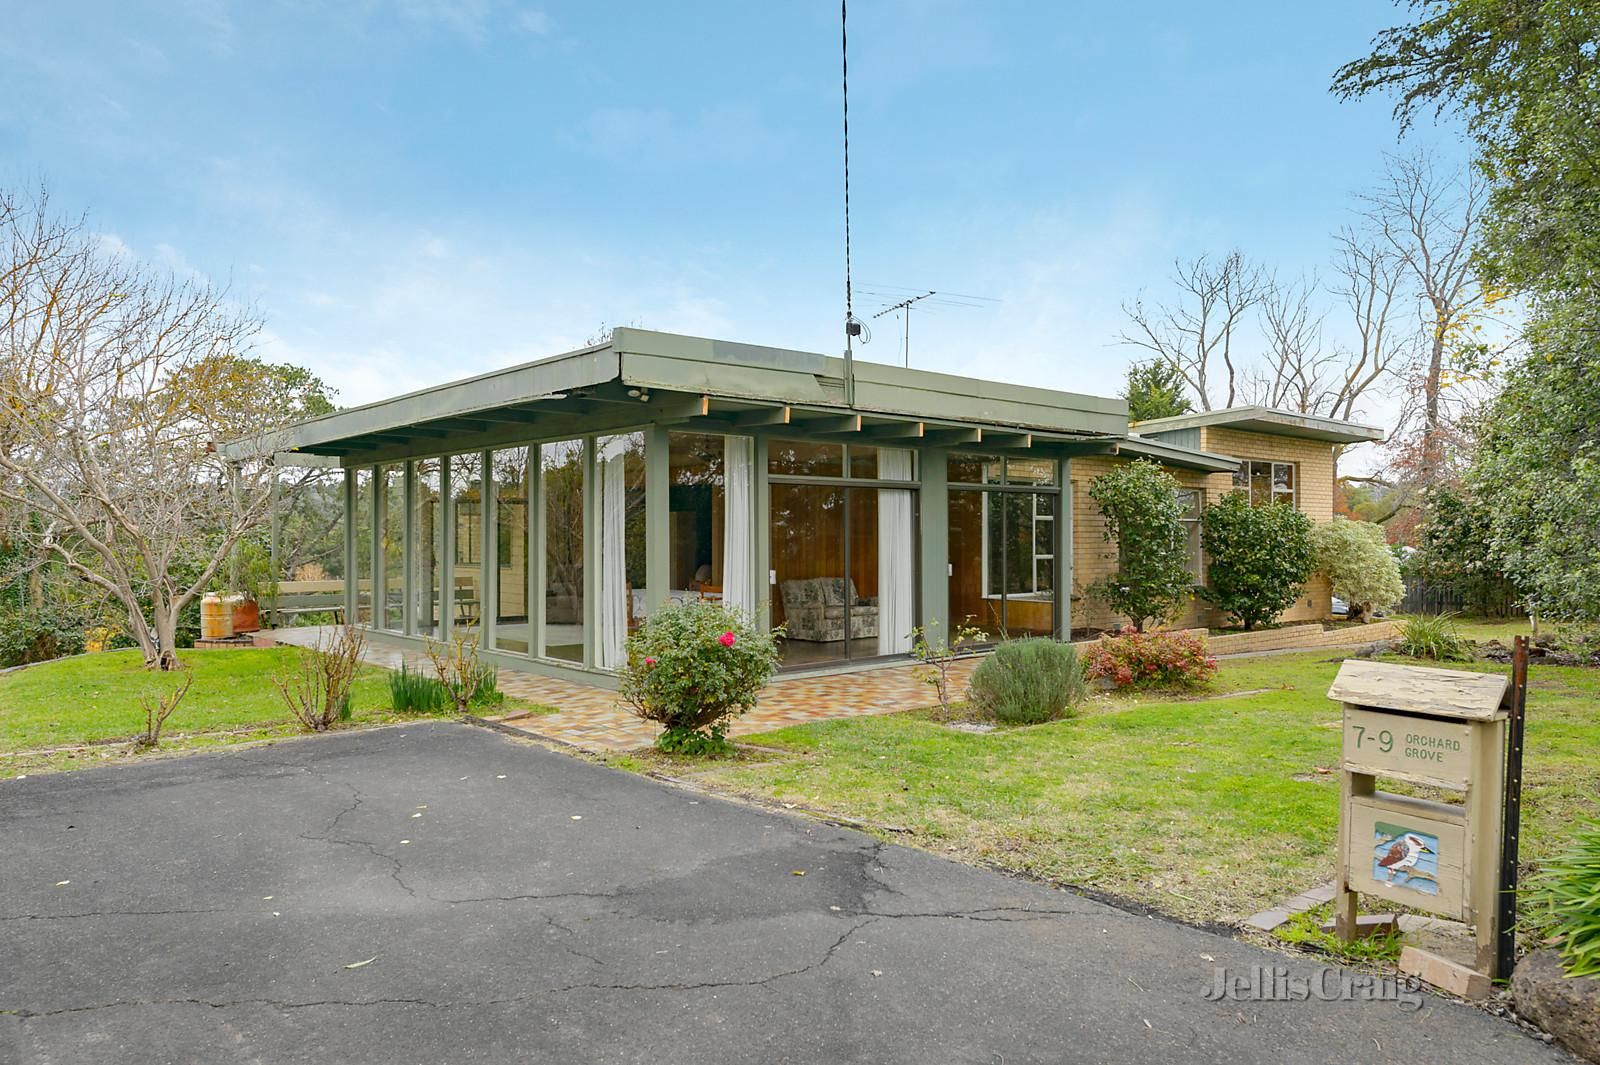 7-9 Orchard Grove, Warrandyte VIC 3113, Image 0